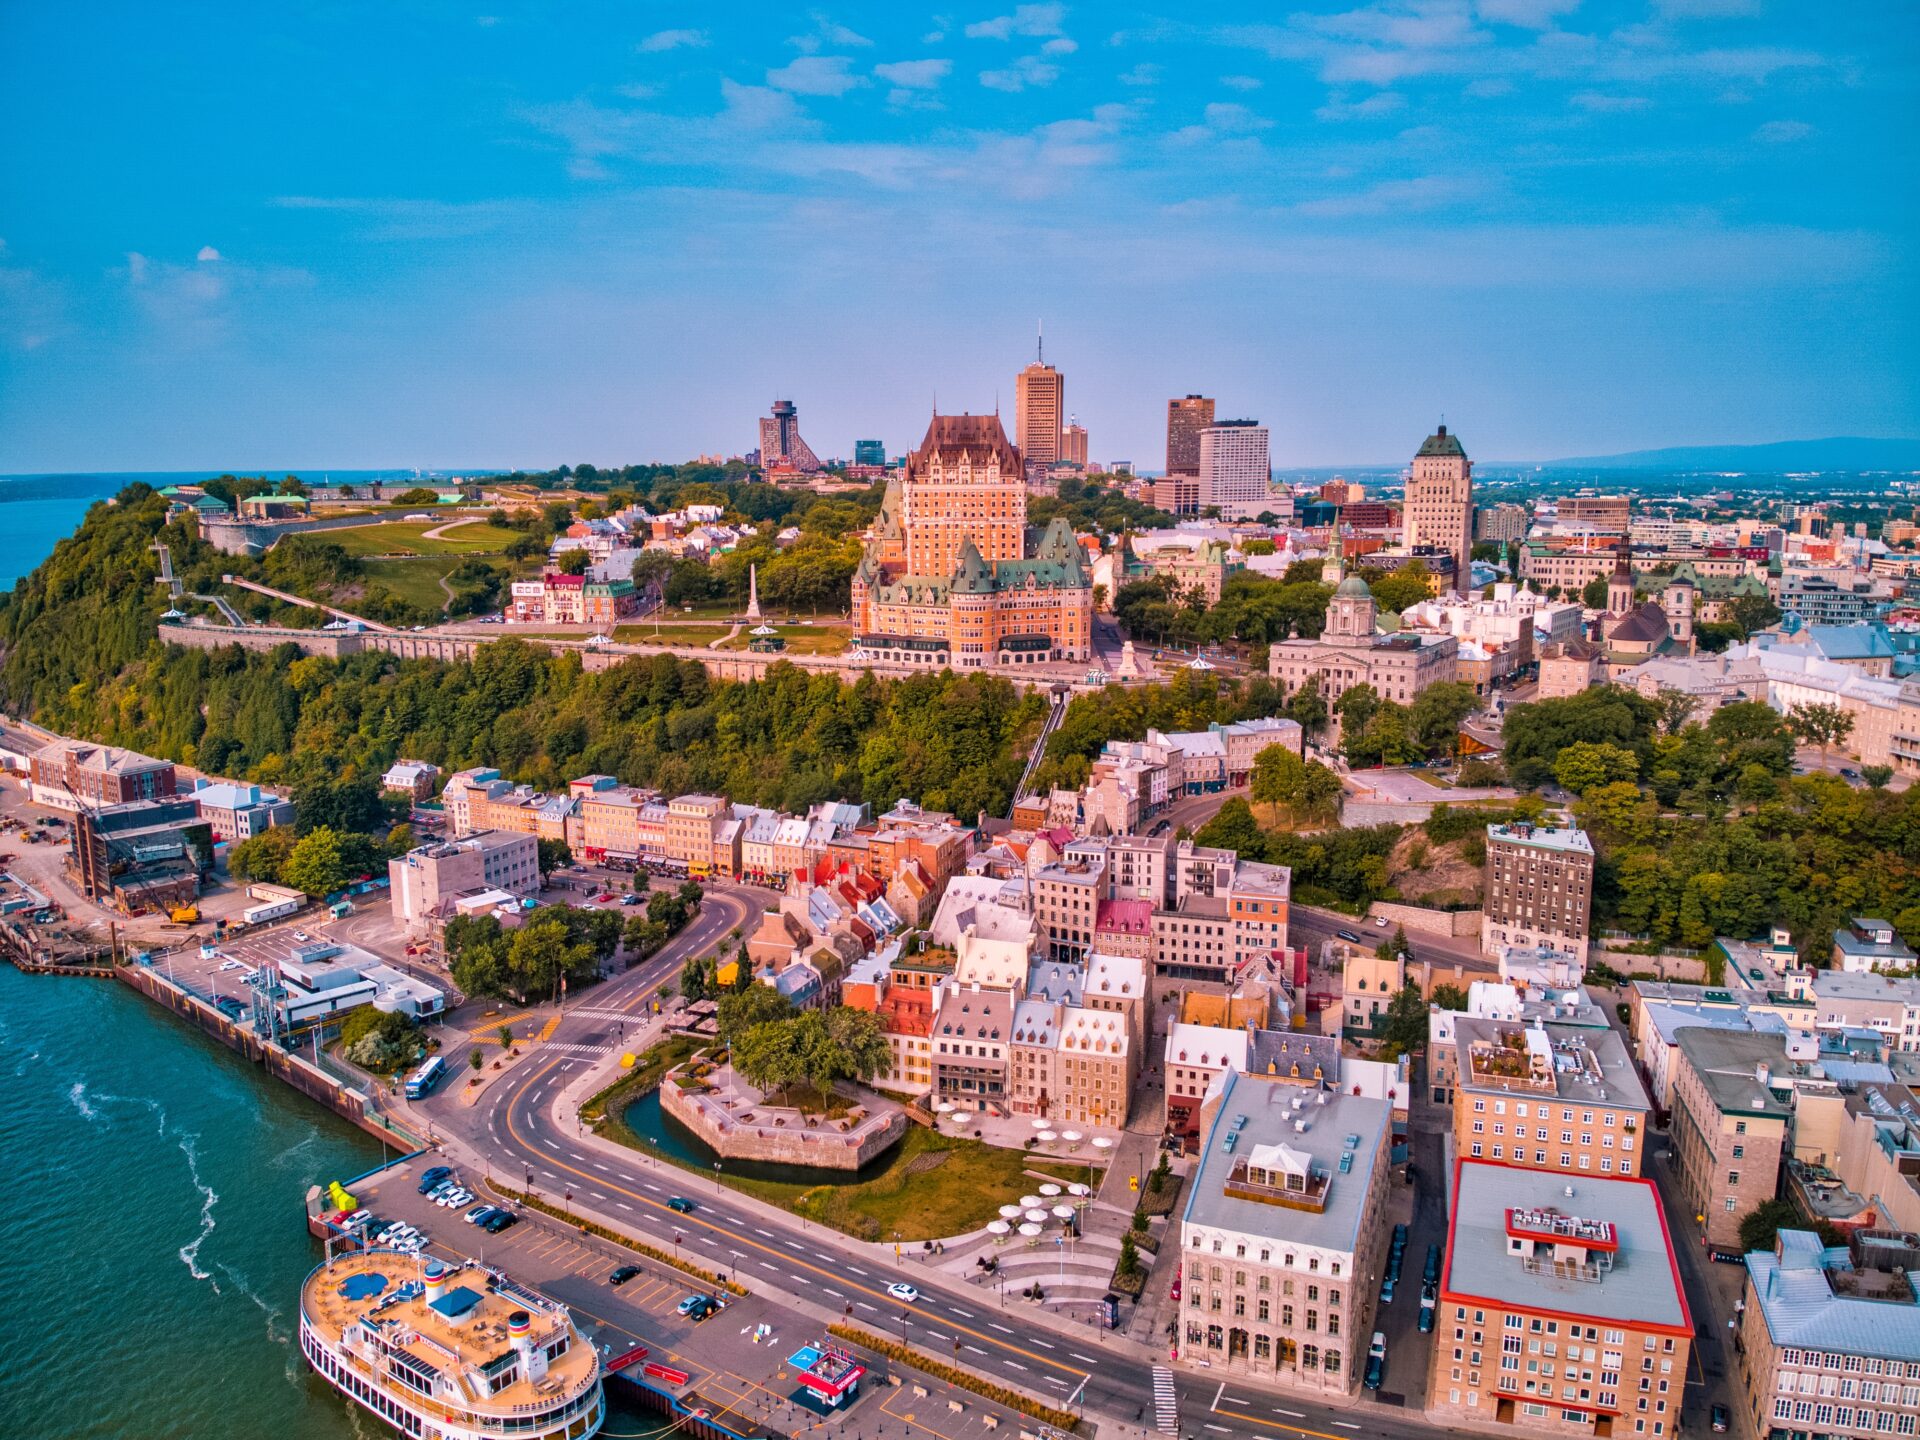 An aerial view of the city of quebec.